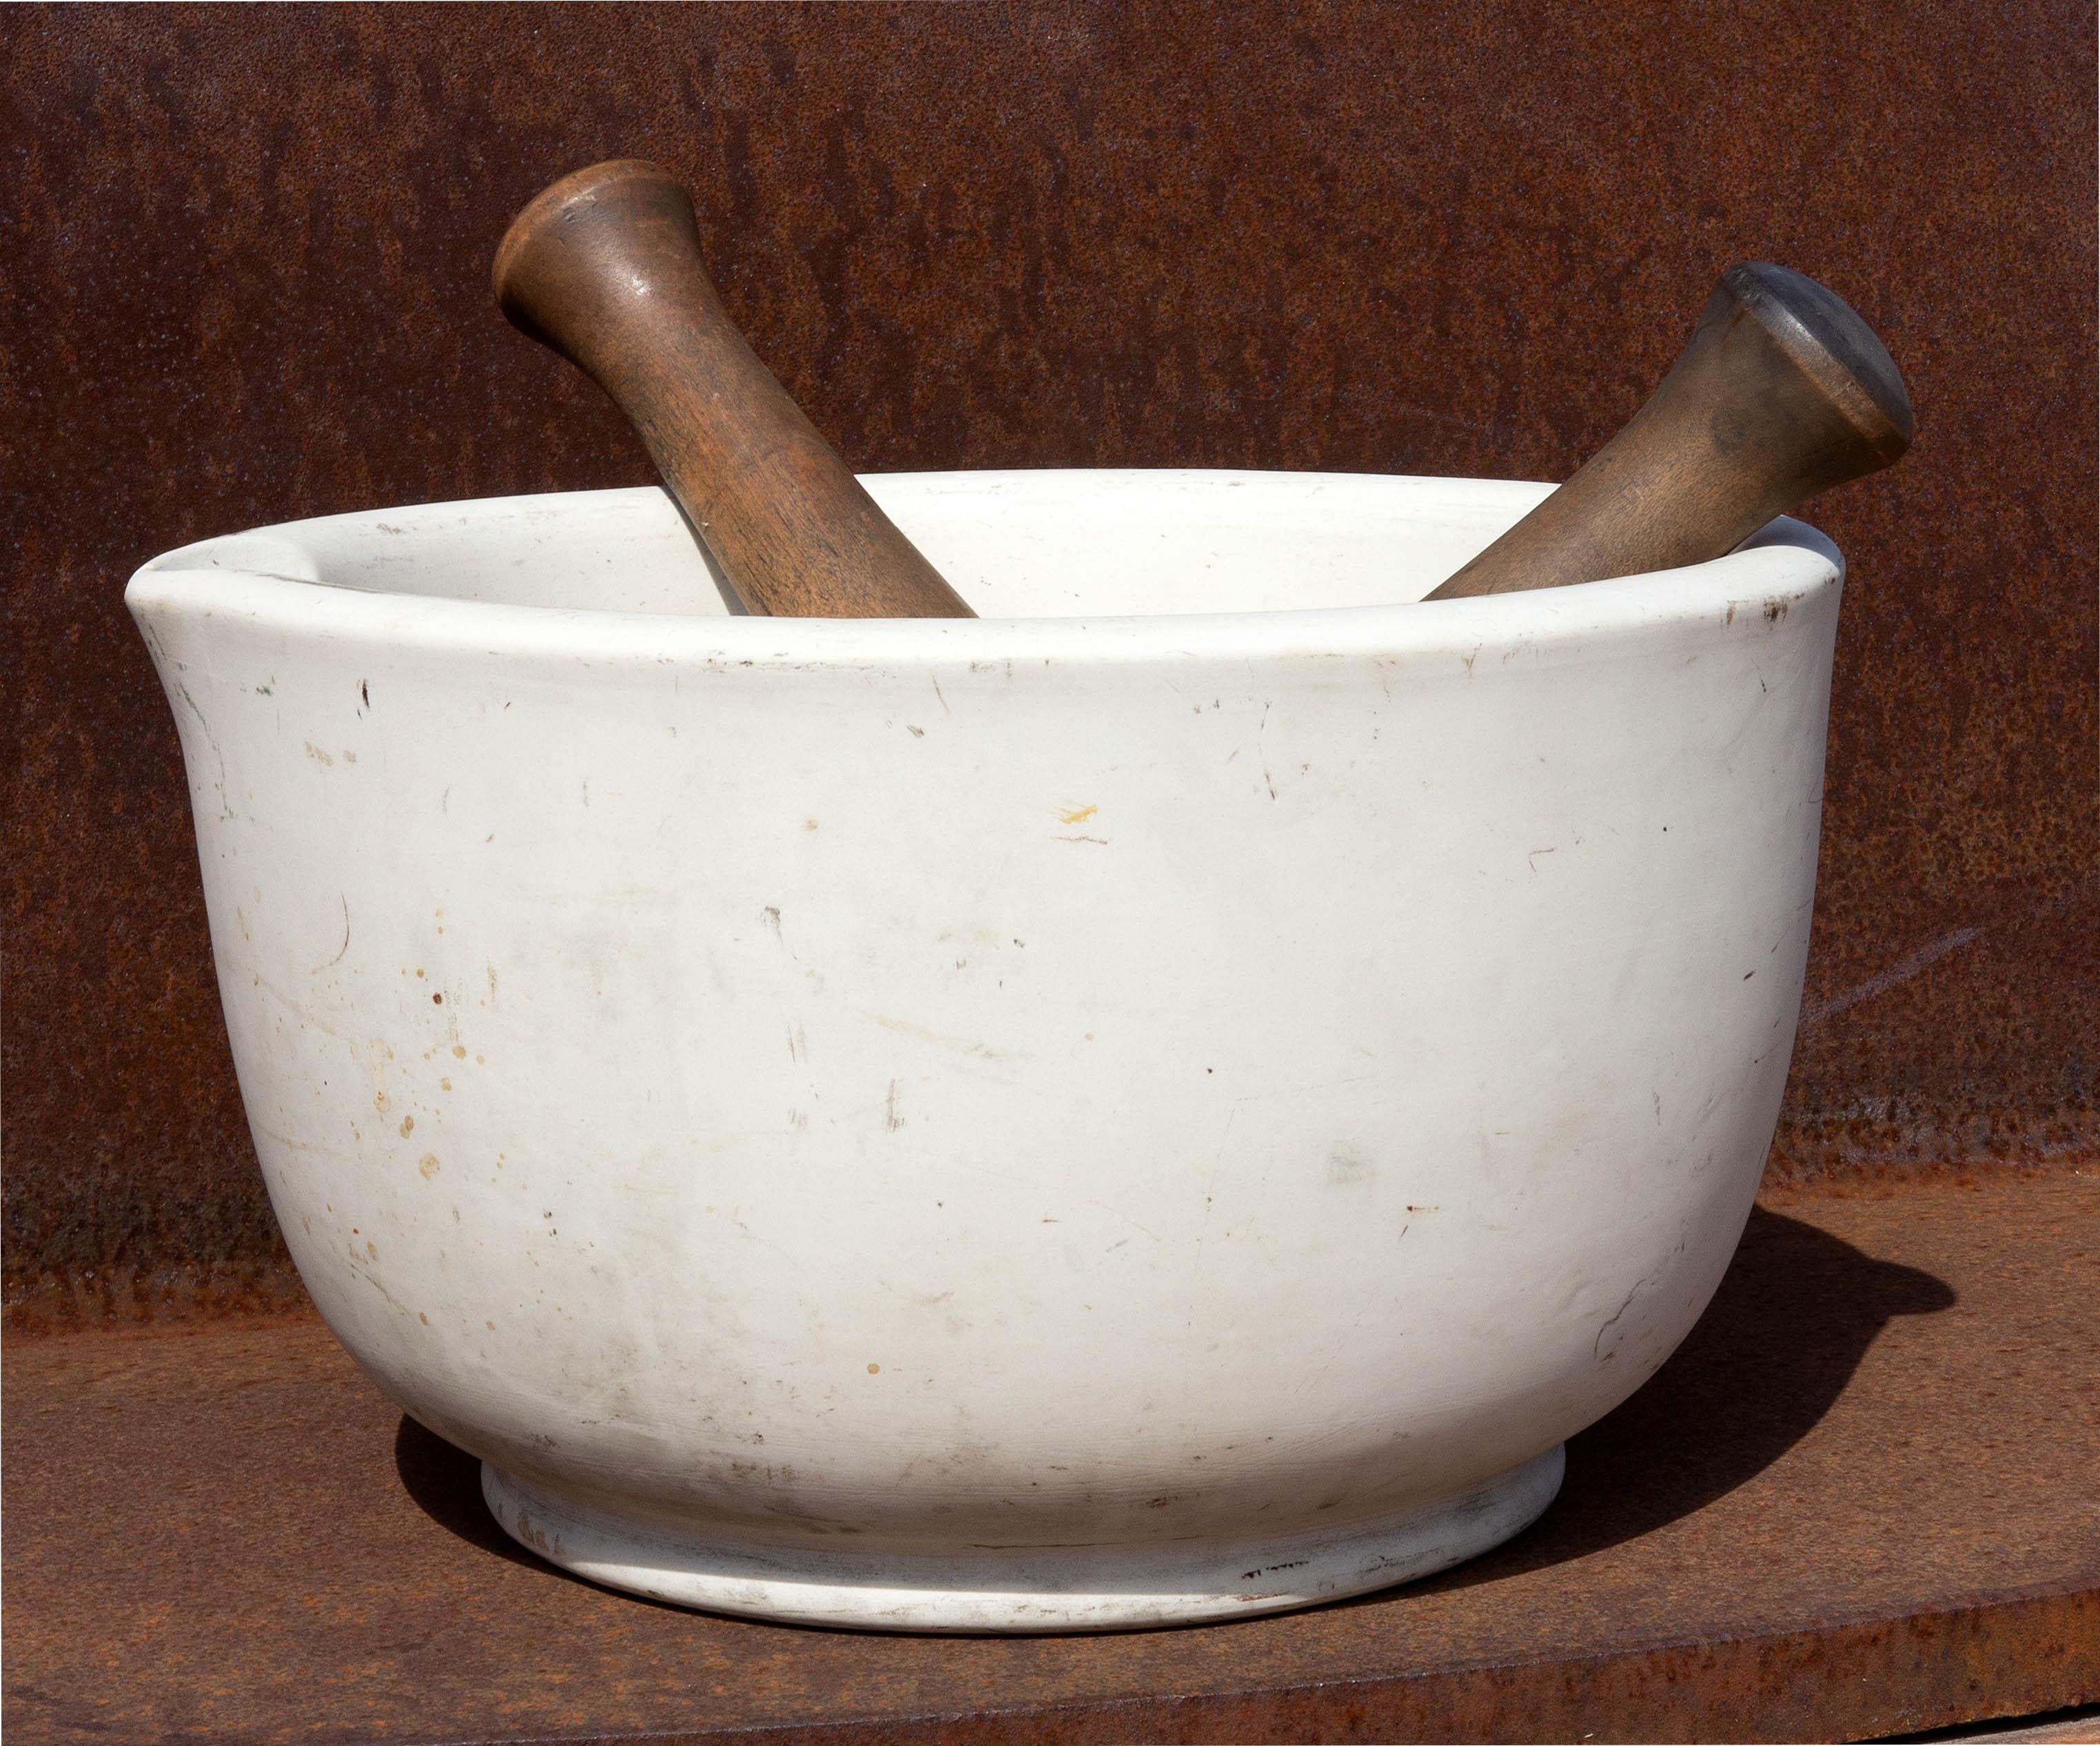 Mammoth porcelain mortar and pestle. Great for cooks or as an accent piece. Heavy duty. Mortar weighs over 25 lbs. Measures: 14.75